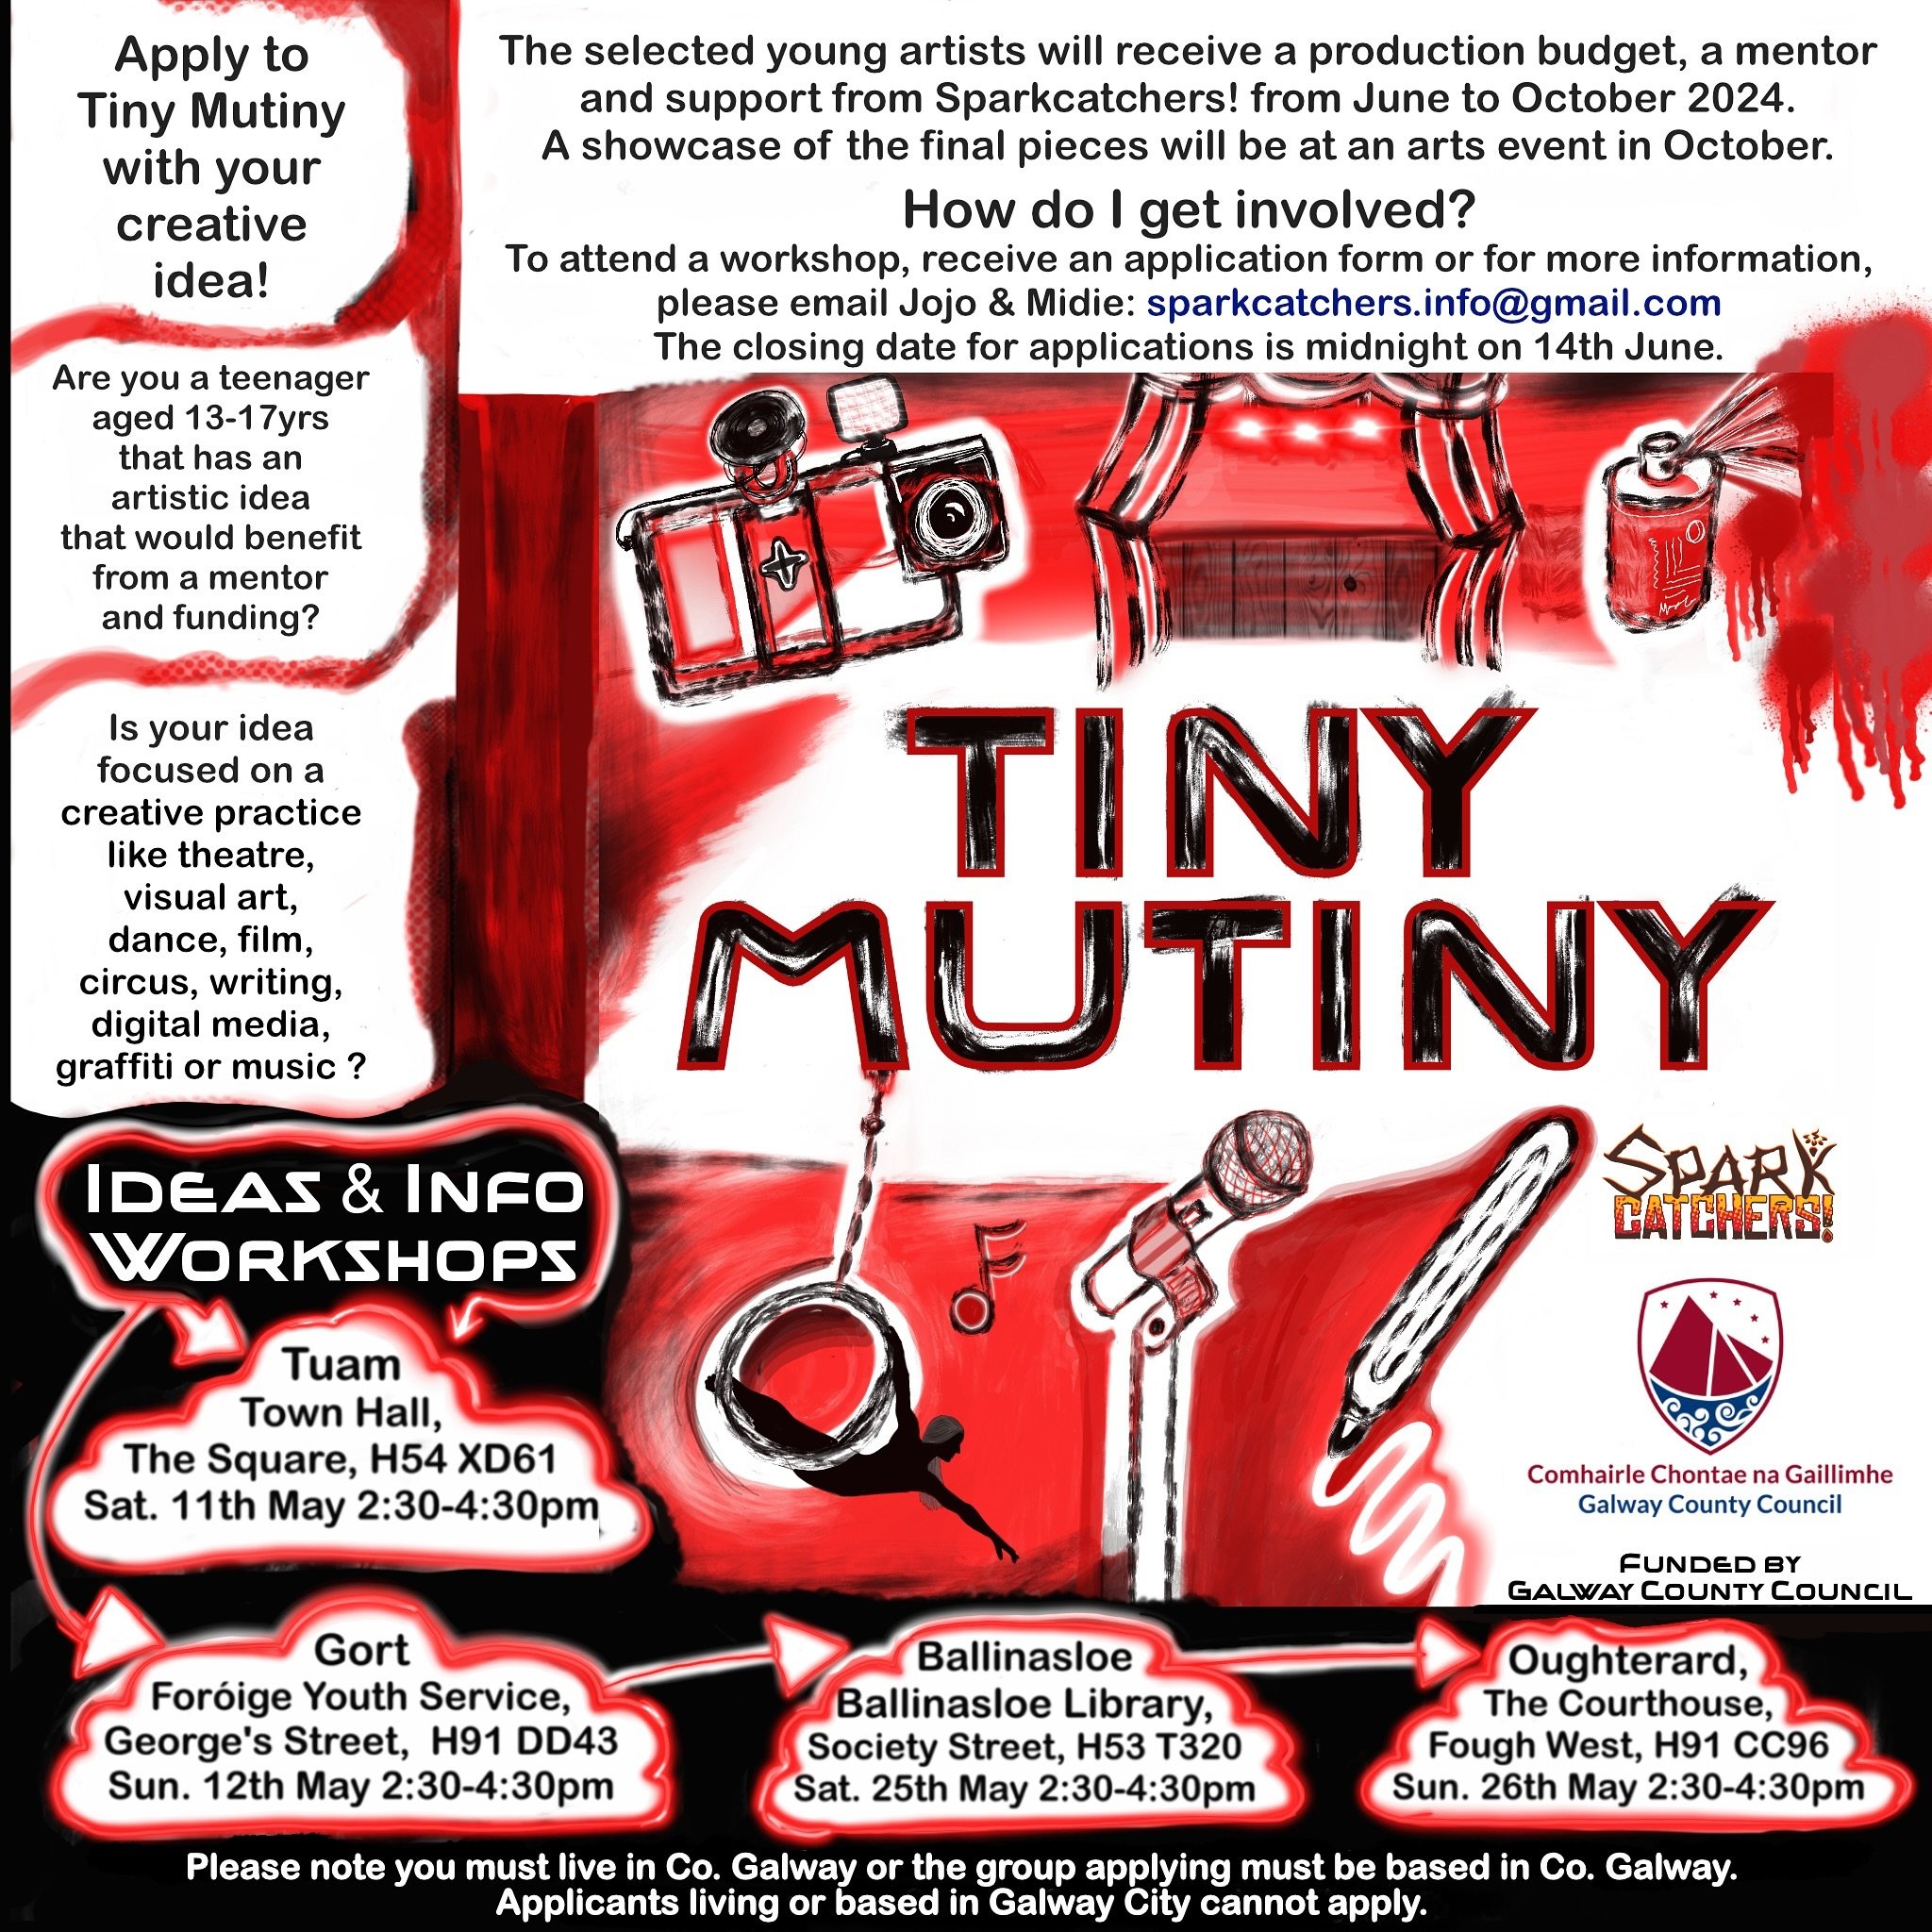 Tiny Mutiny is a trailblazing initiative of Galway County Arts Office offering creative teenagers the opportunity to realise their artistic ideas with support from a professional mentor along with a production budget. Teenagers can apply with an idea